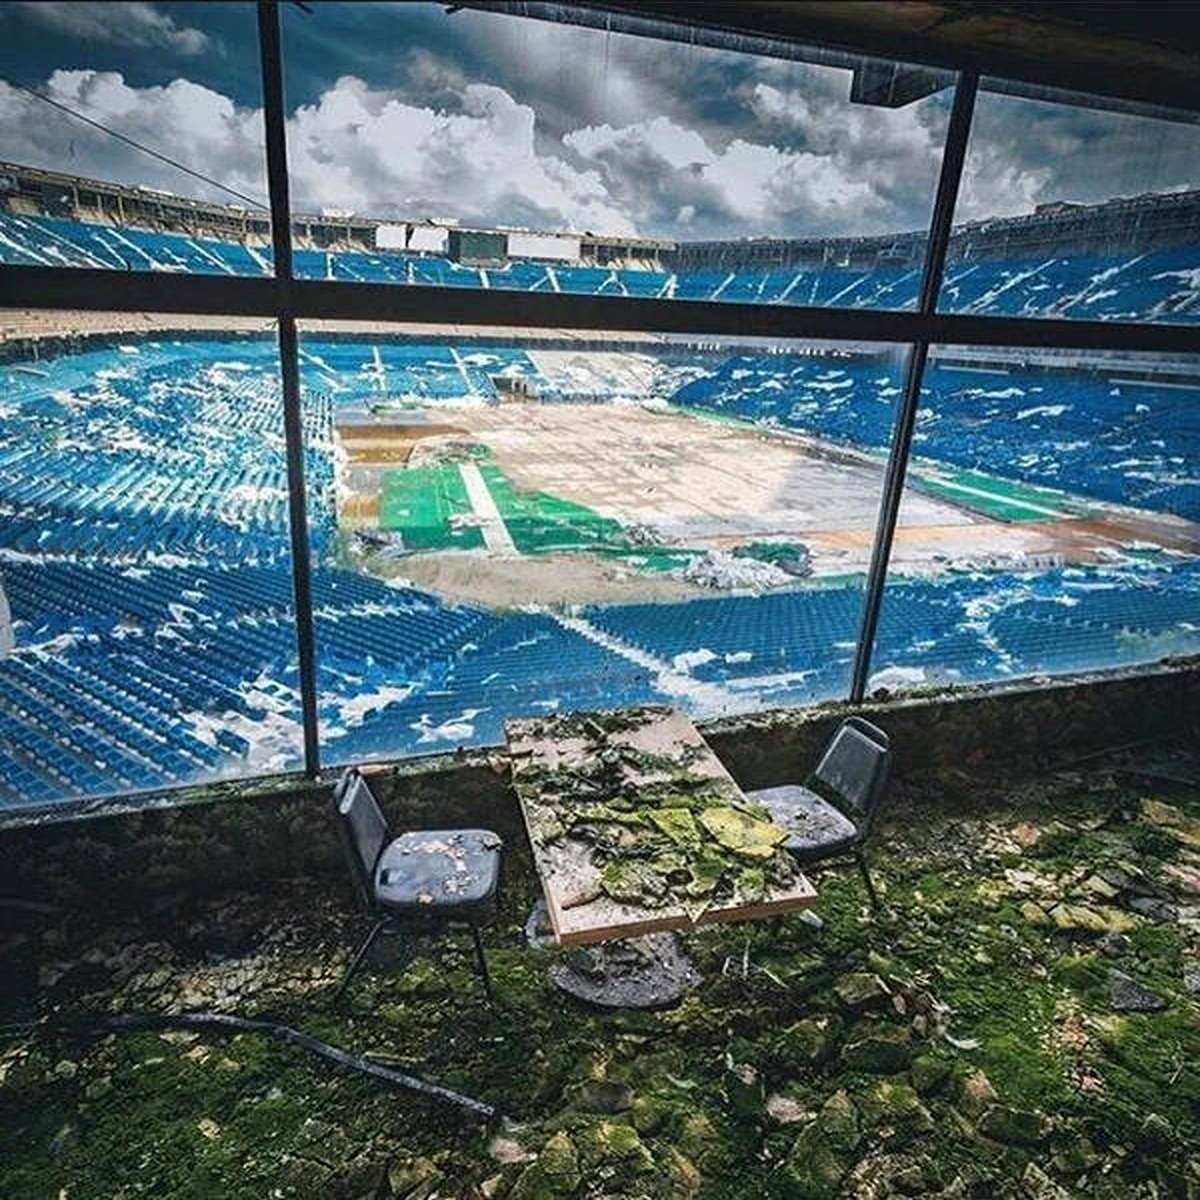 The now abandoned Silverdome in Detroit is slowly being reclaimed by nature.